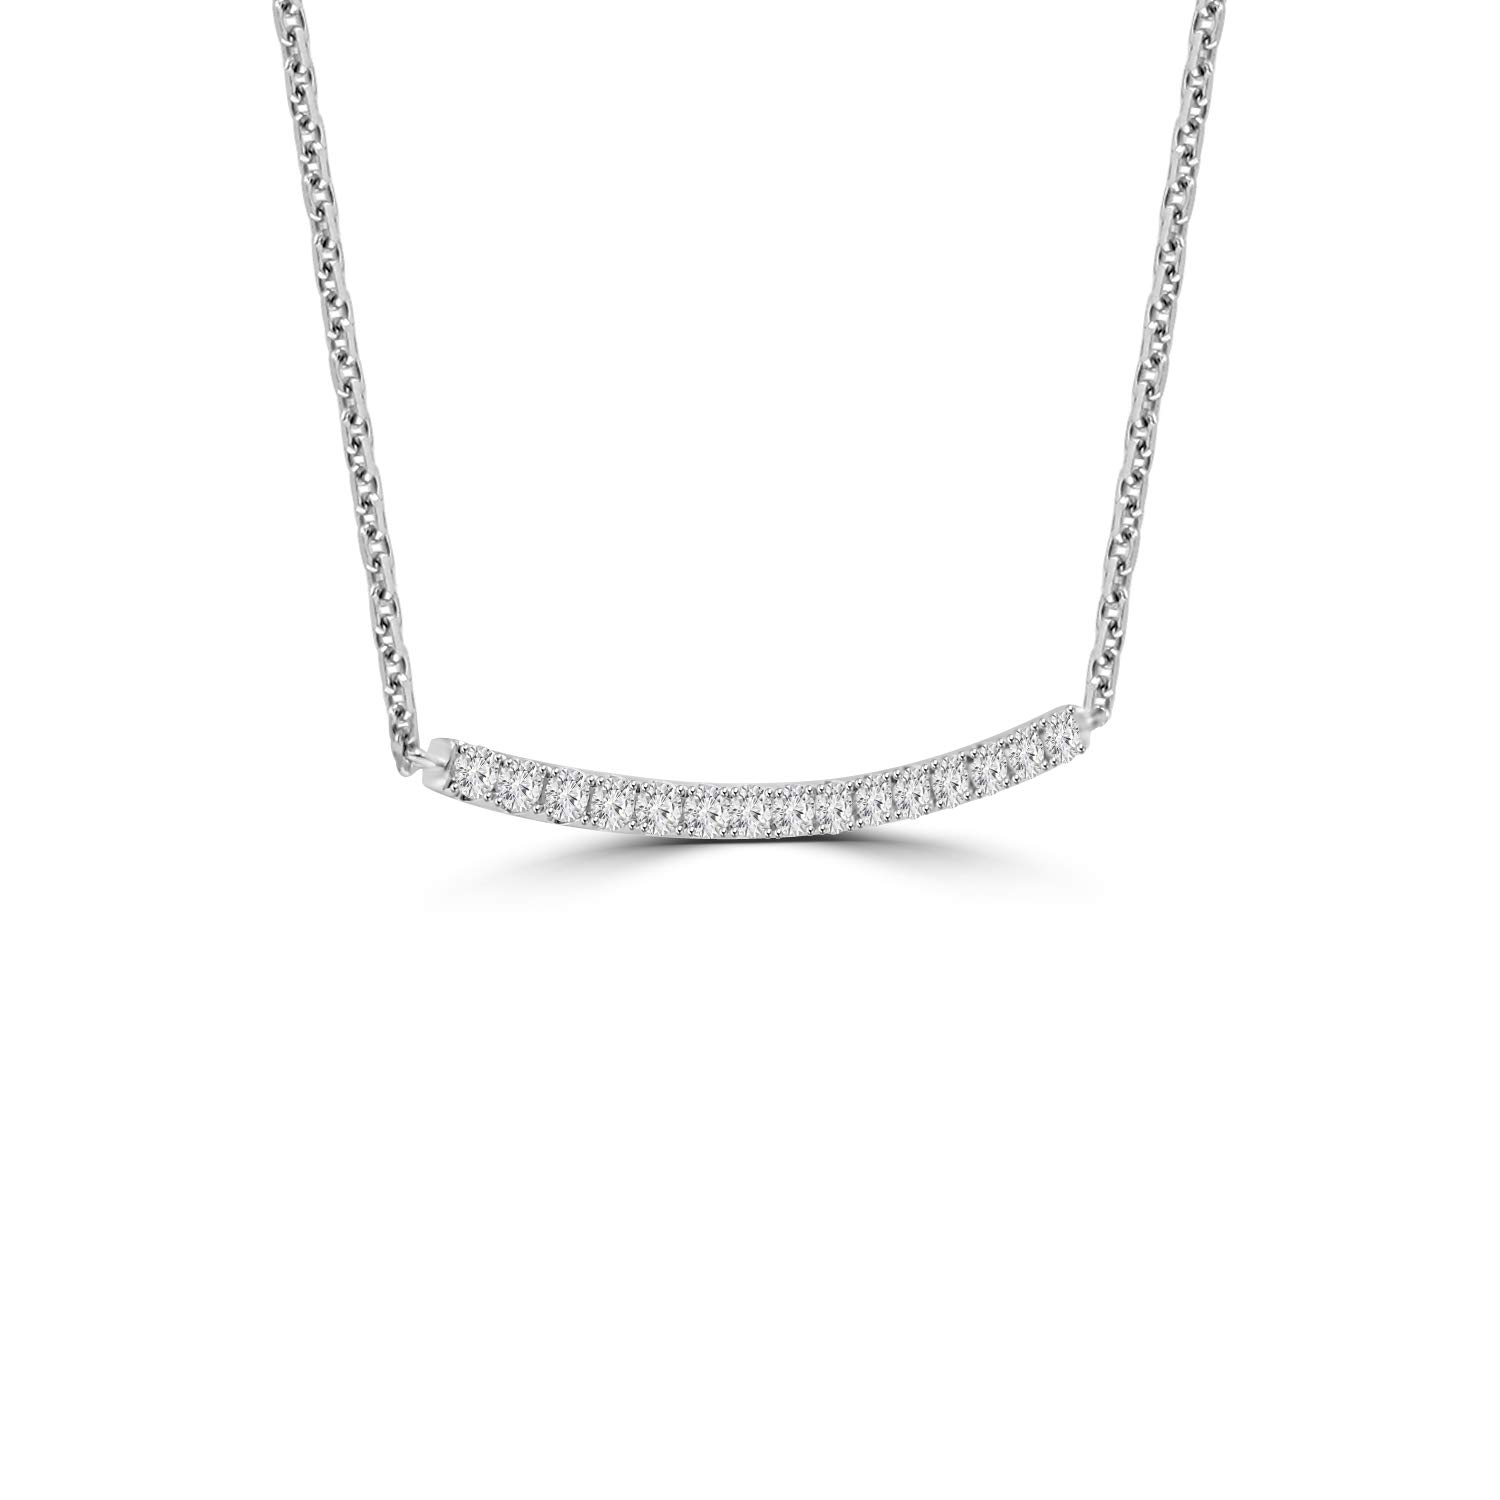 Madina Jewelry 0.55 ct Round Cut Diamond Stick Bar Horizontal Long Pendant Necklace for Women (G Color SI-1 Clarity) With 16 inch Chain Included